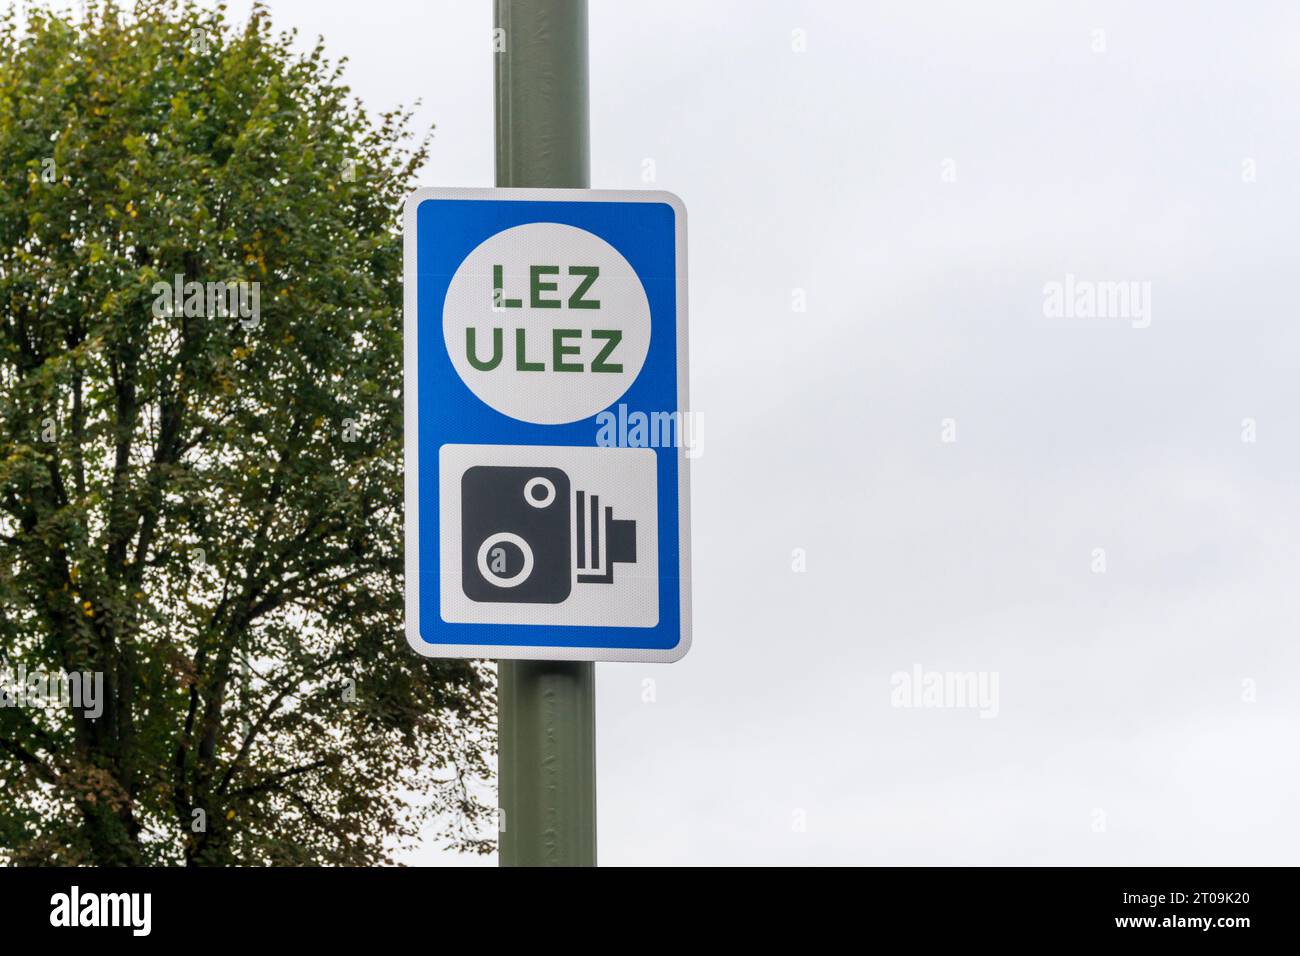 LEZ and ULEZ camera sign in South London. Stock Photo